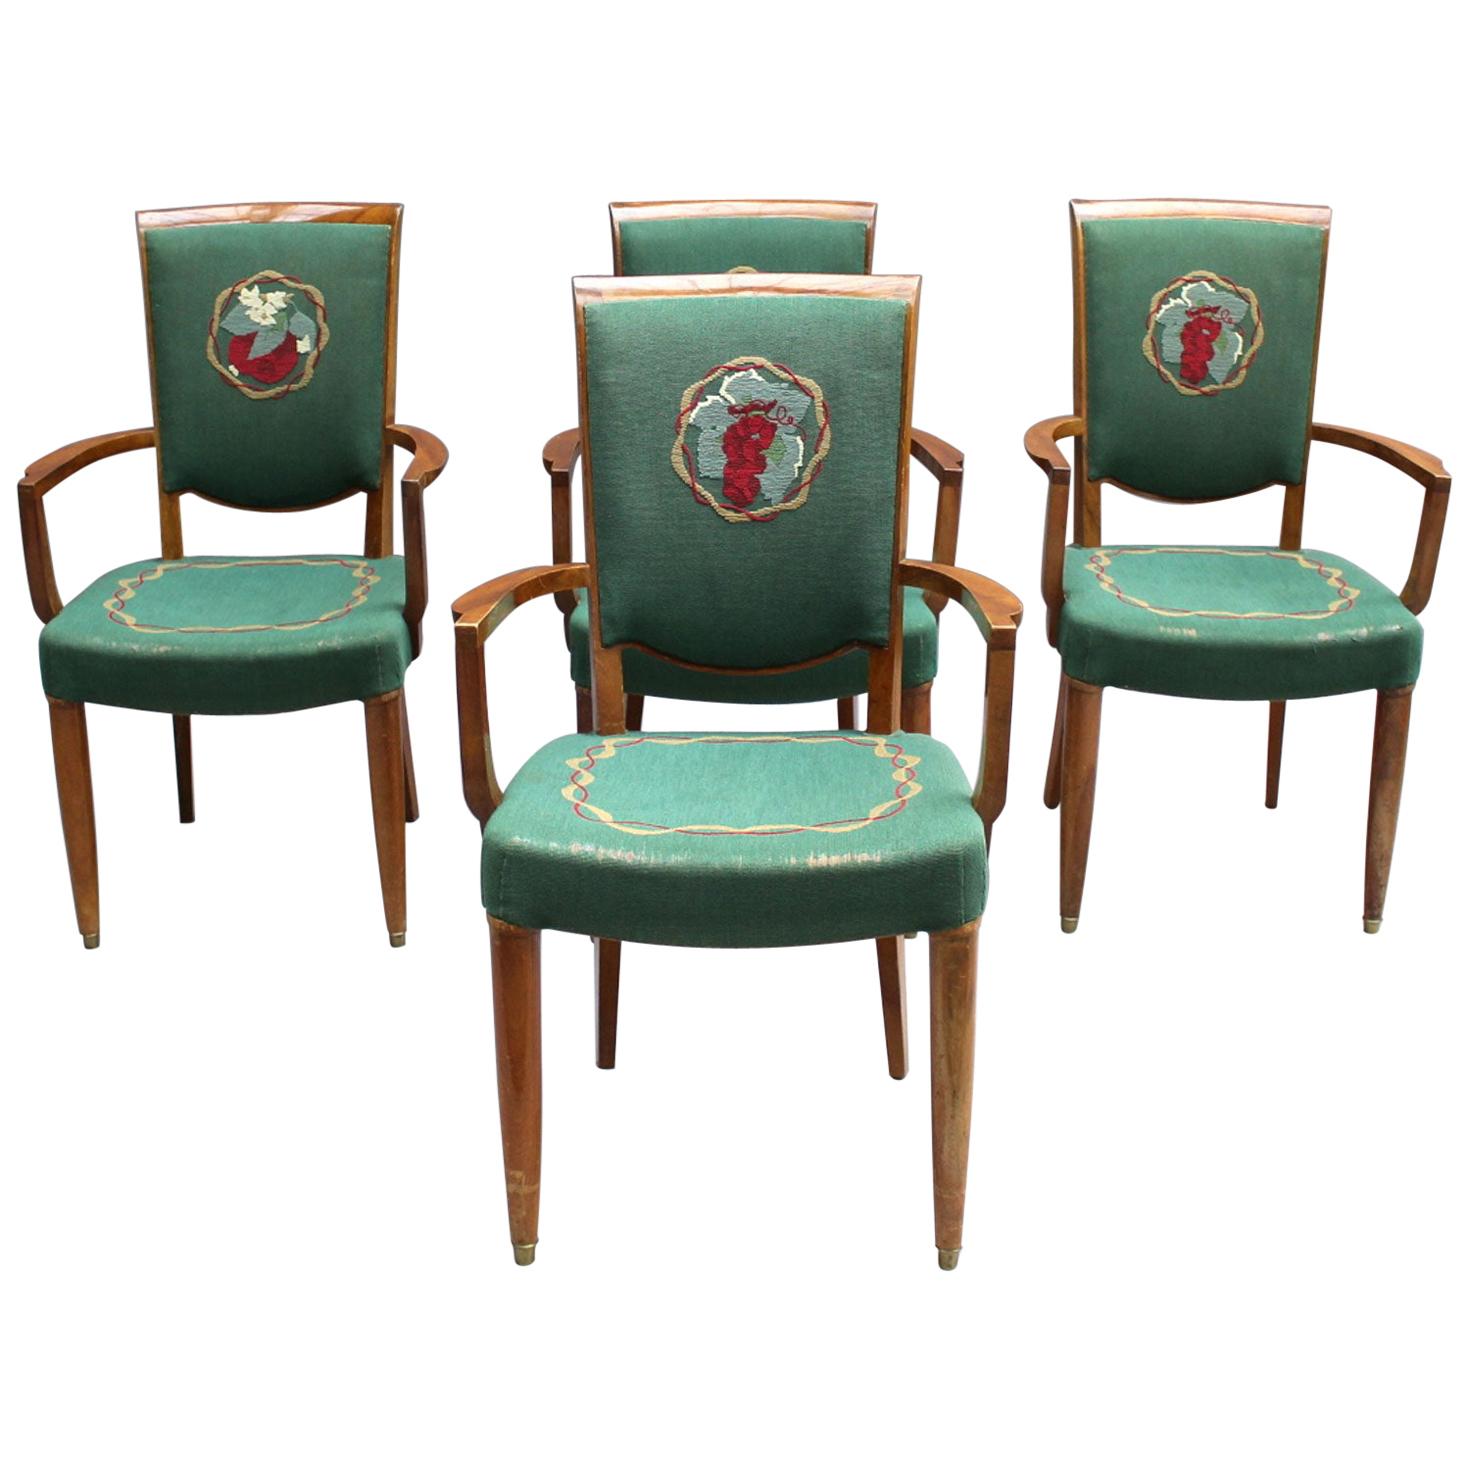 4 Fine French Art Deco Armchairs by Jules Leleu (2 on hold)